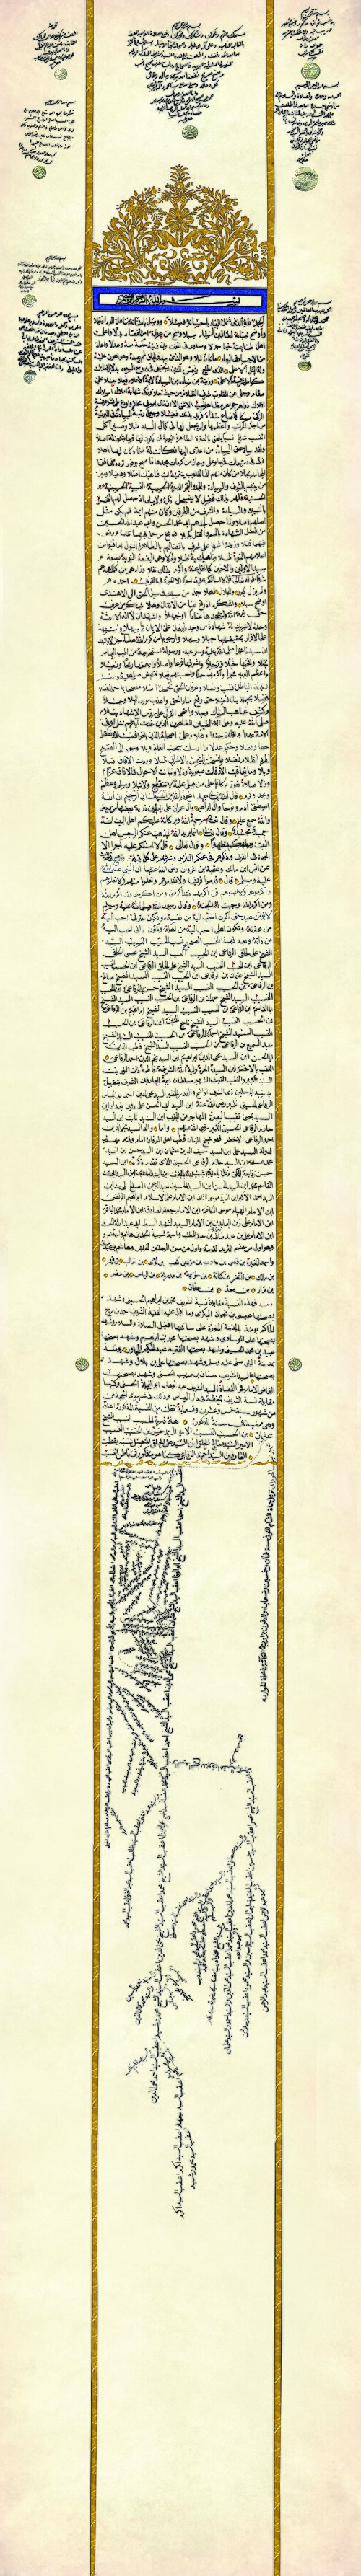 A digital reconstruction of Al-Hourani family tree, the original document is created back in 1519 and displayed in the National Museum of Hama. The tr